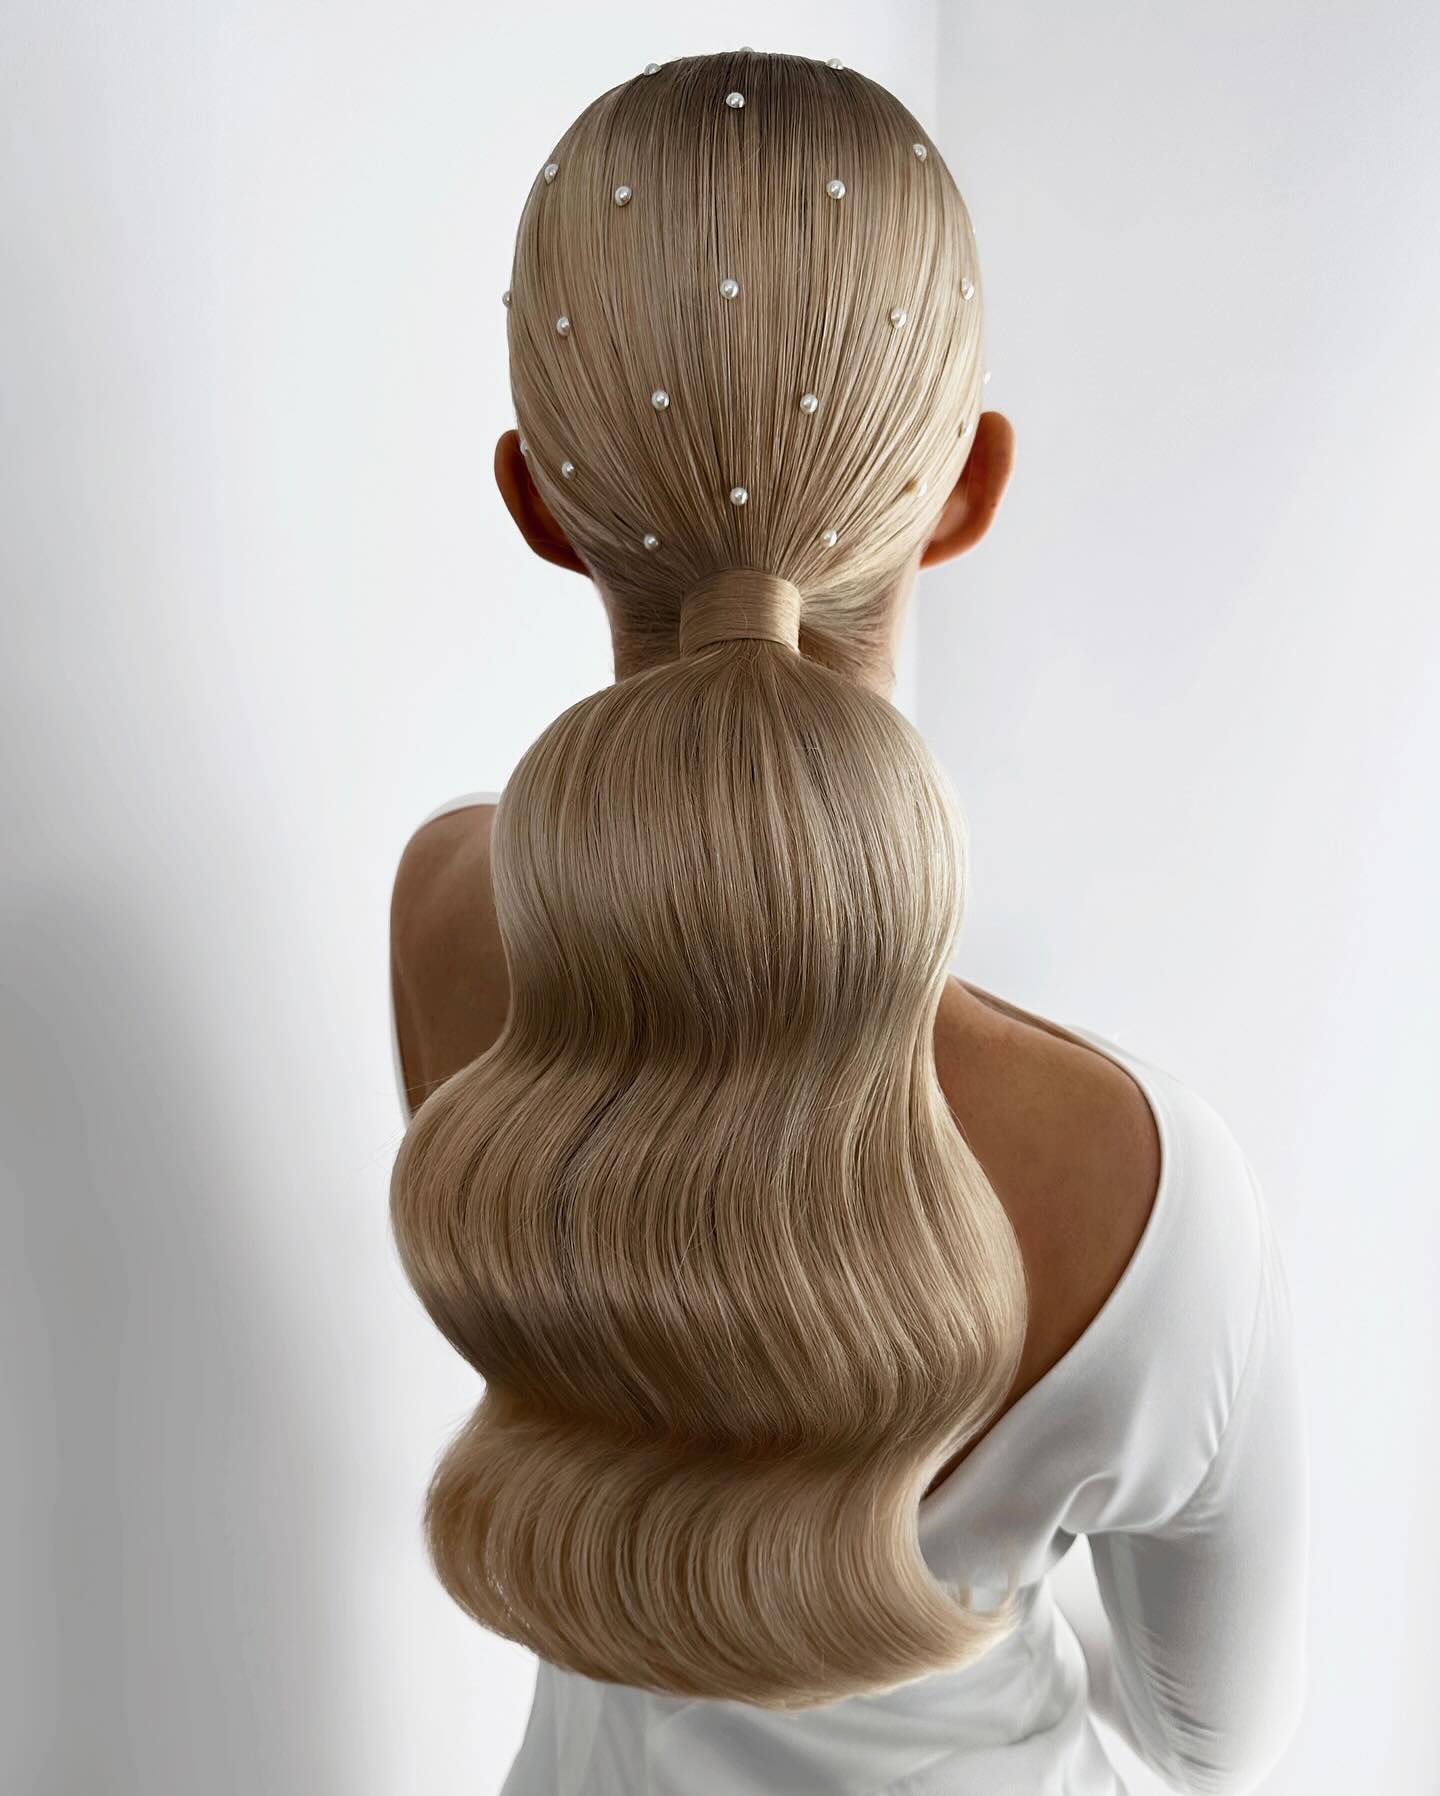 low ponytail with pearls